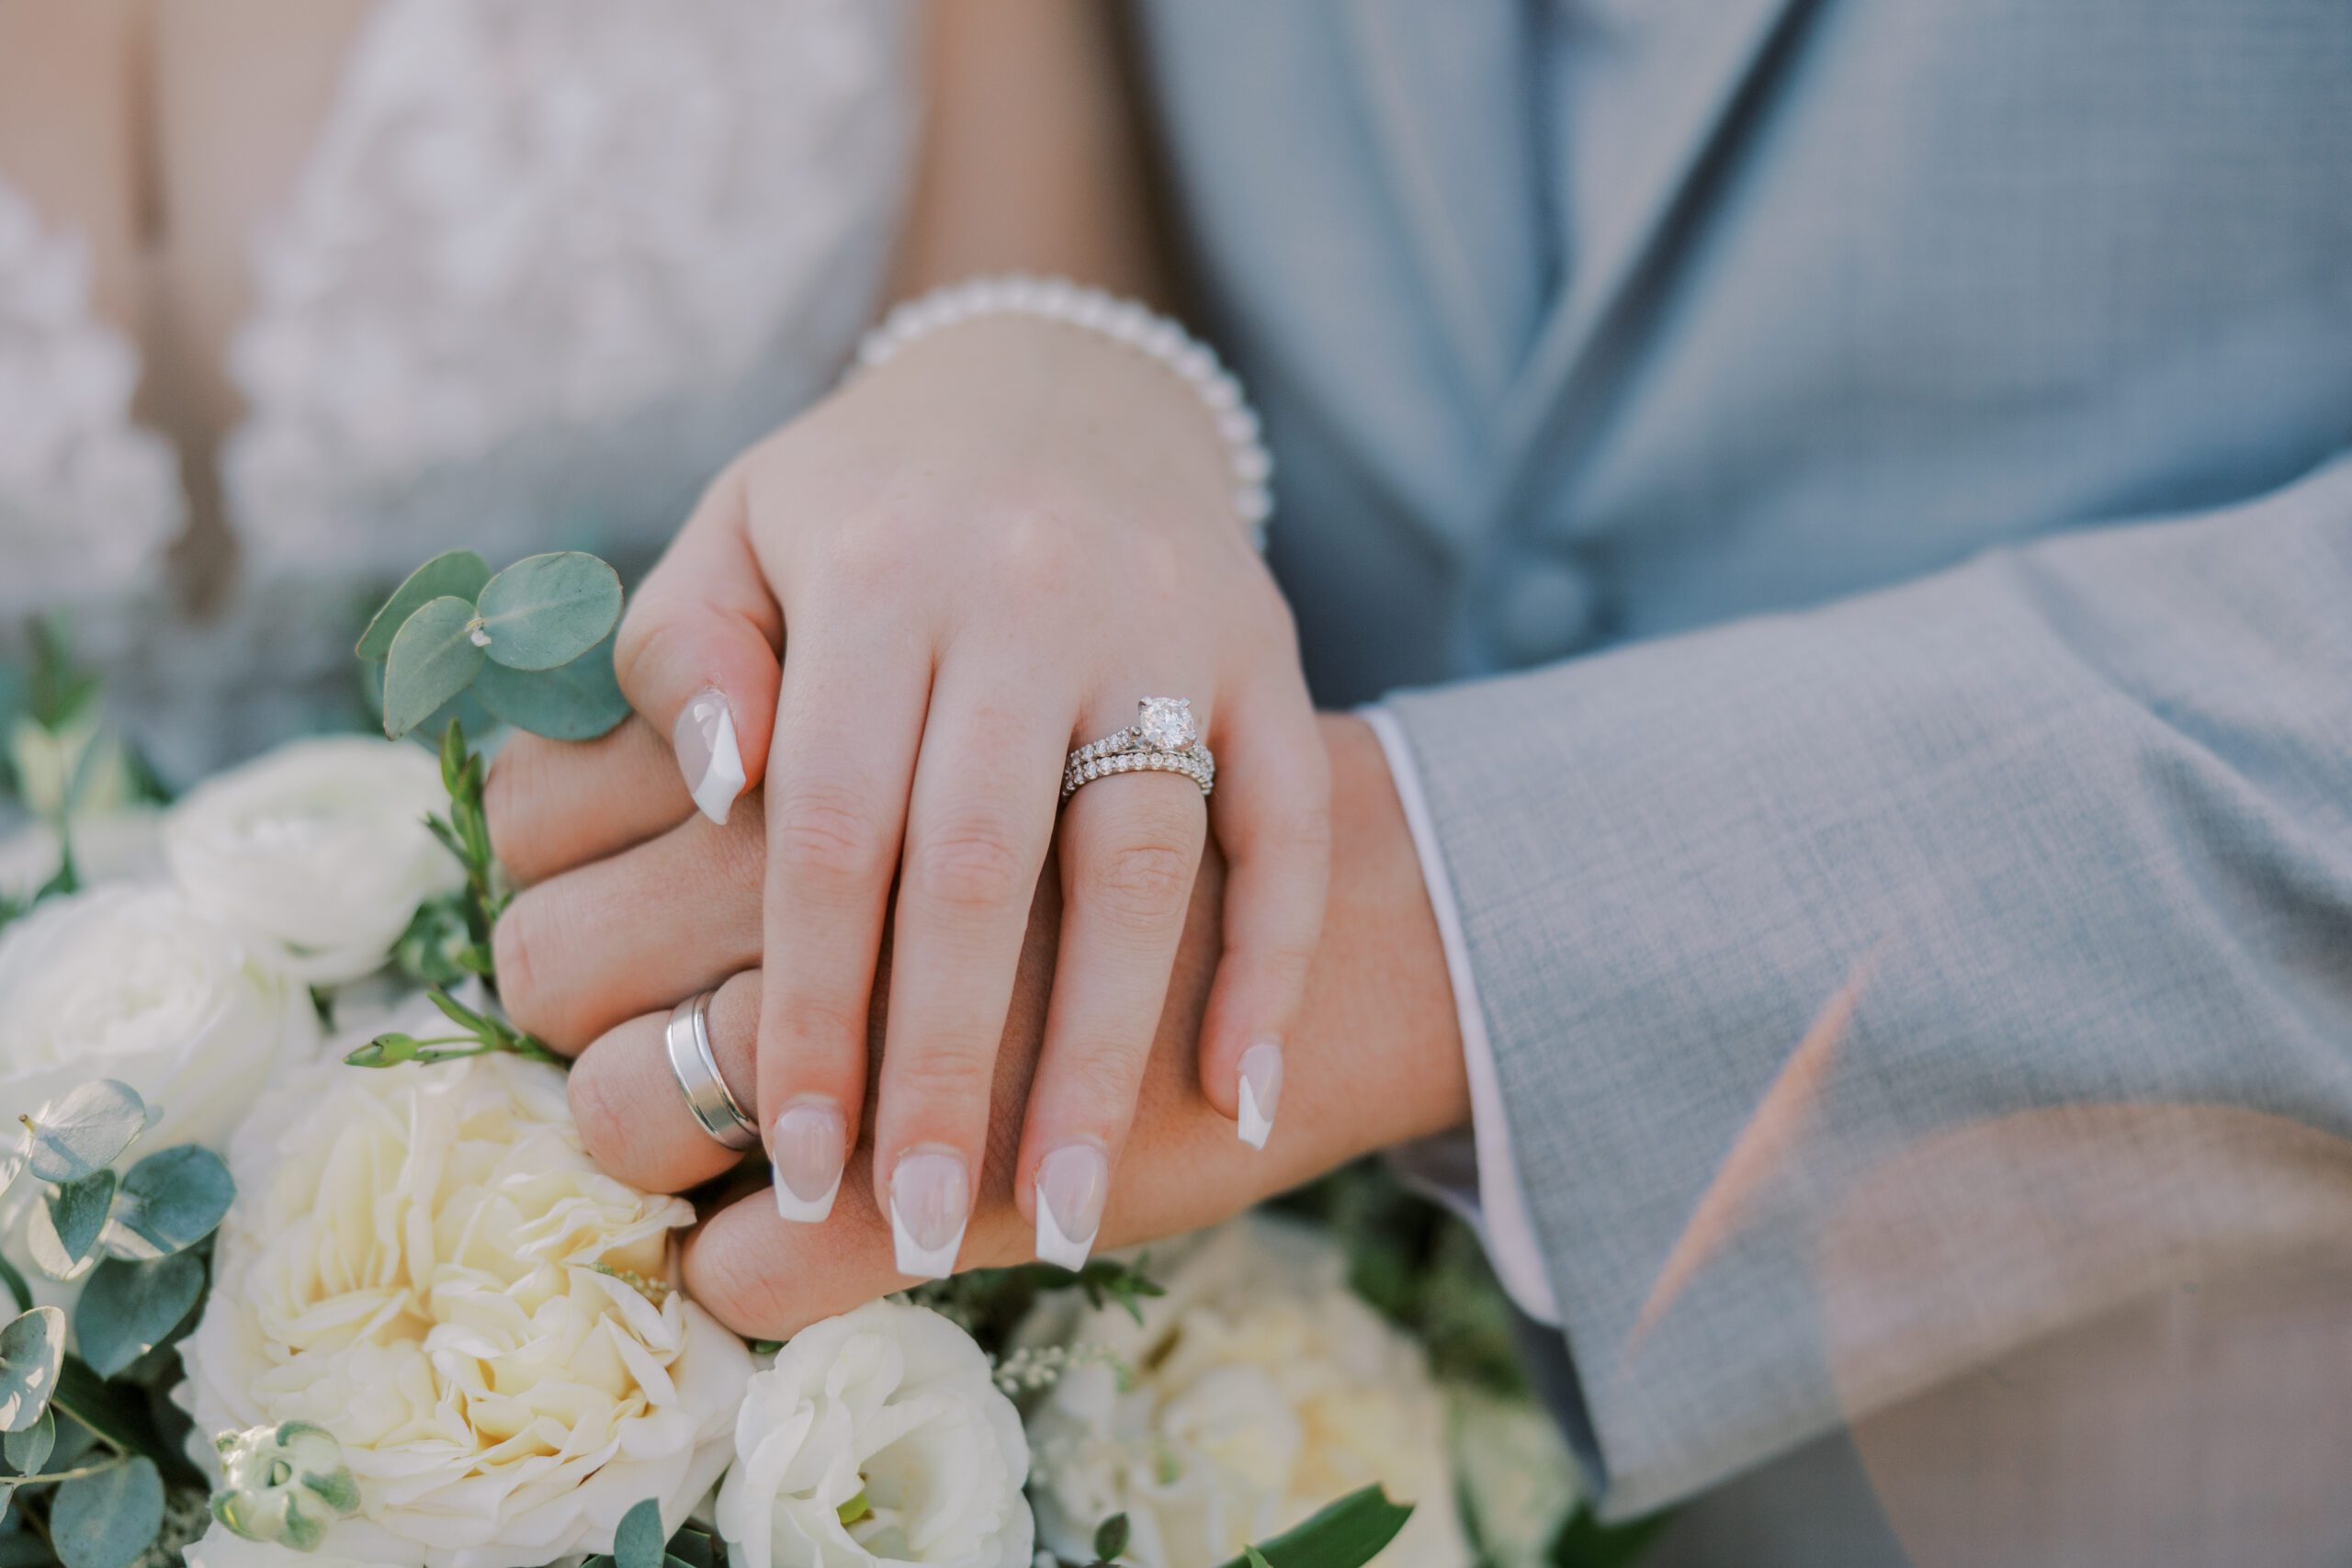 Close up image of bride and groom's hands showing off their wedding rings with bride's bouquet in background